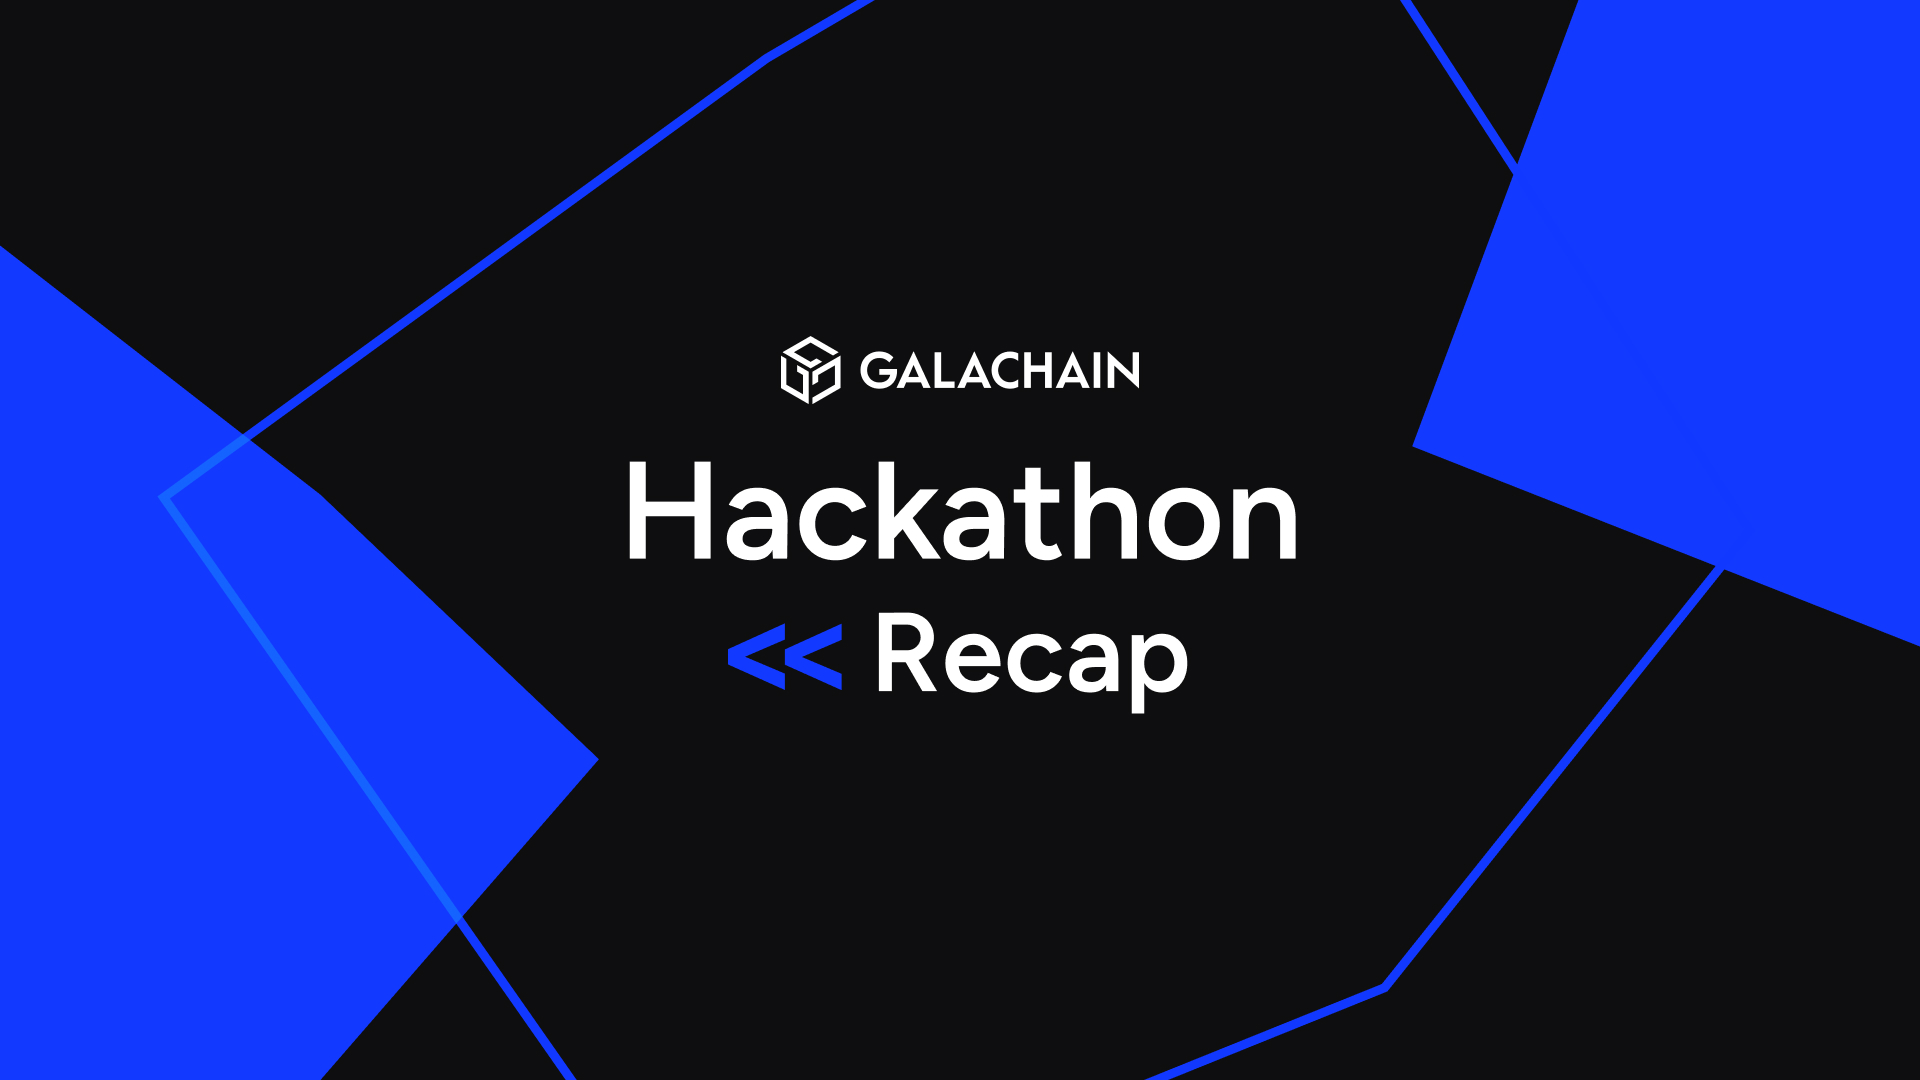 Our latest Discord GalaChain hackathon is concluded!